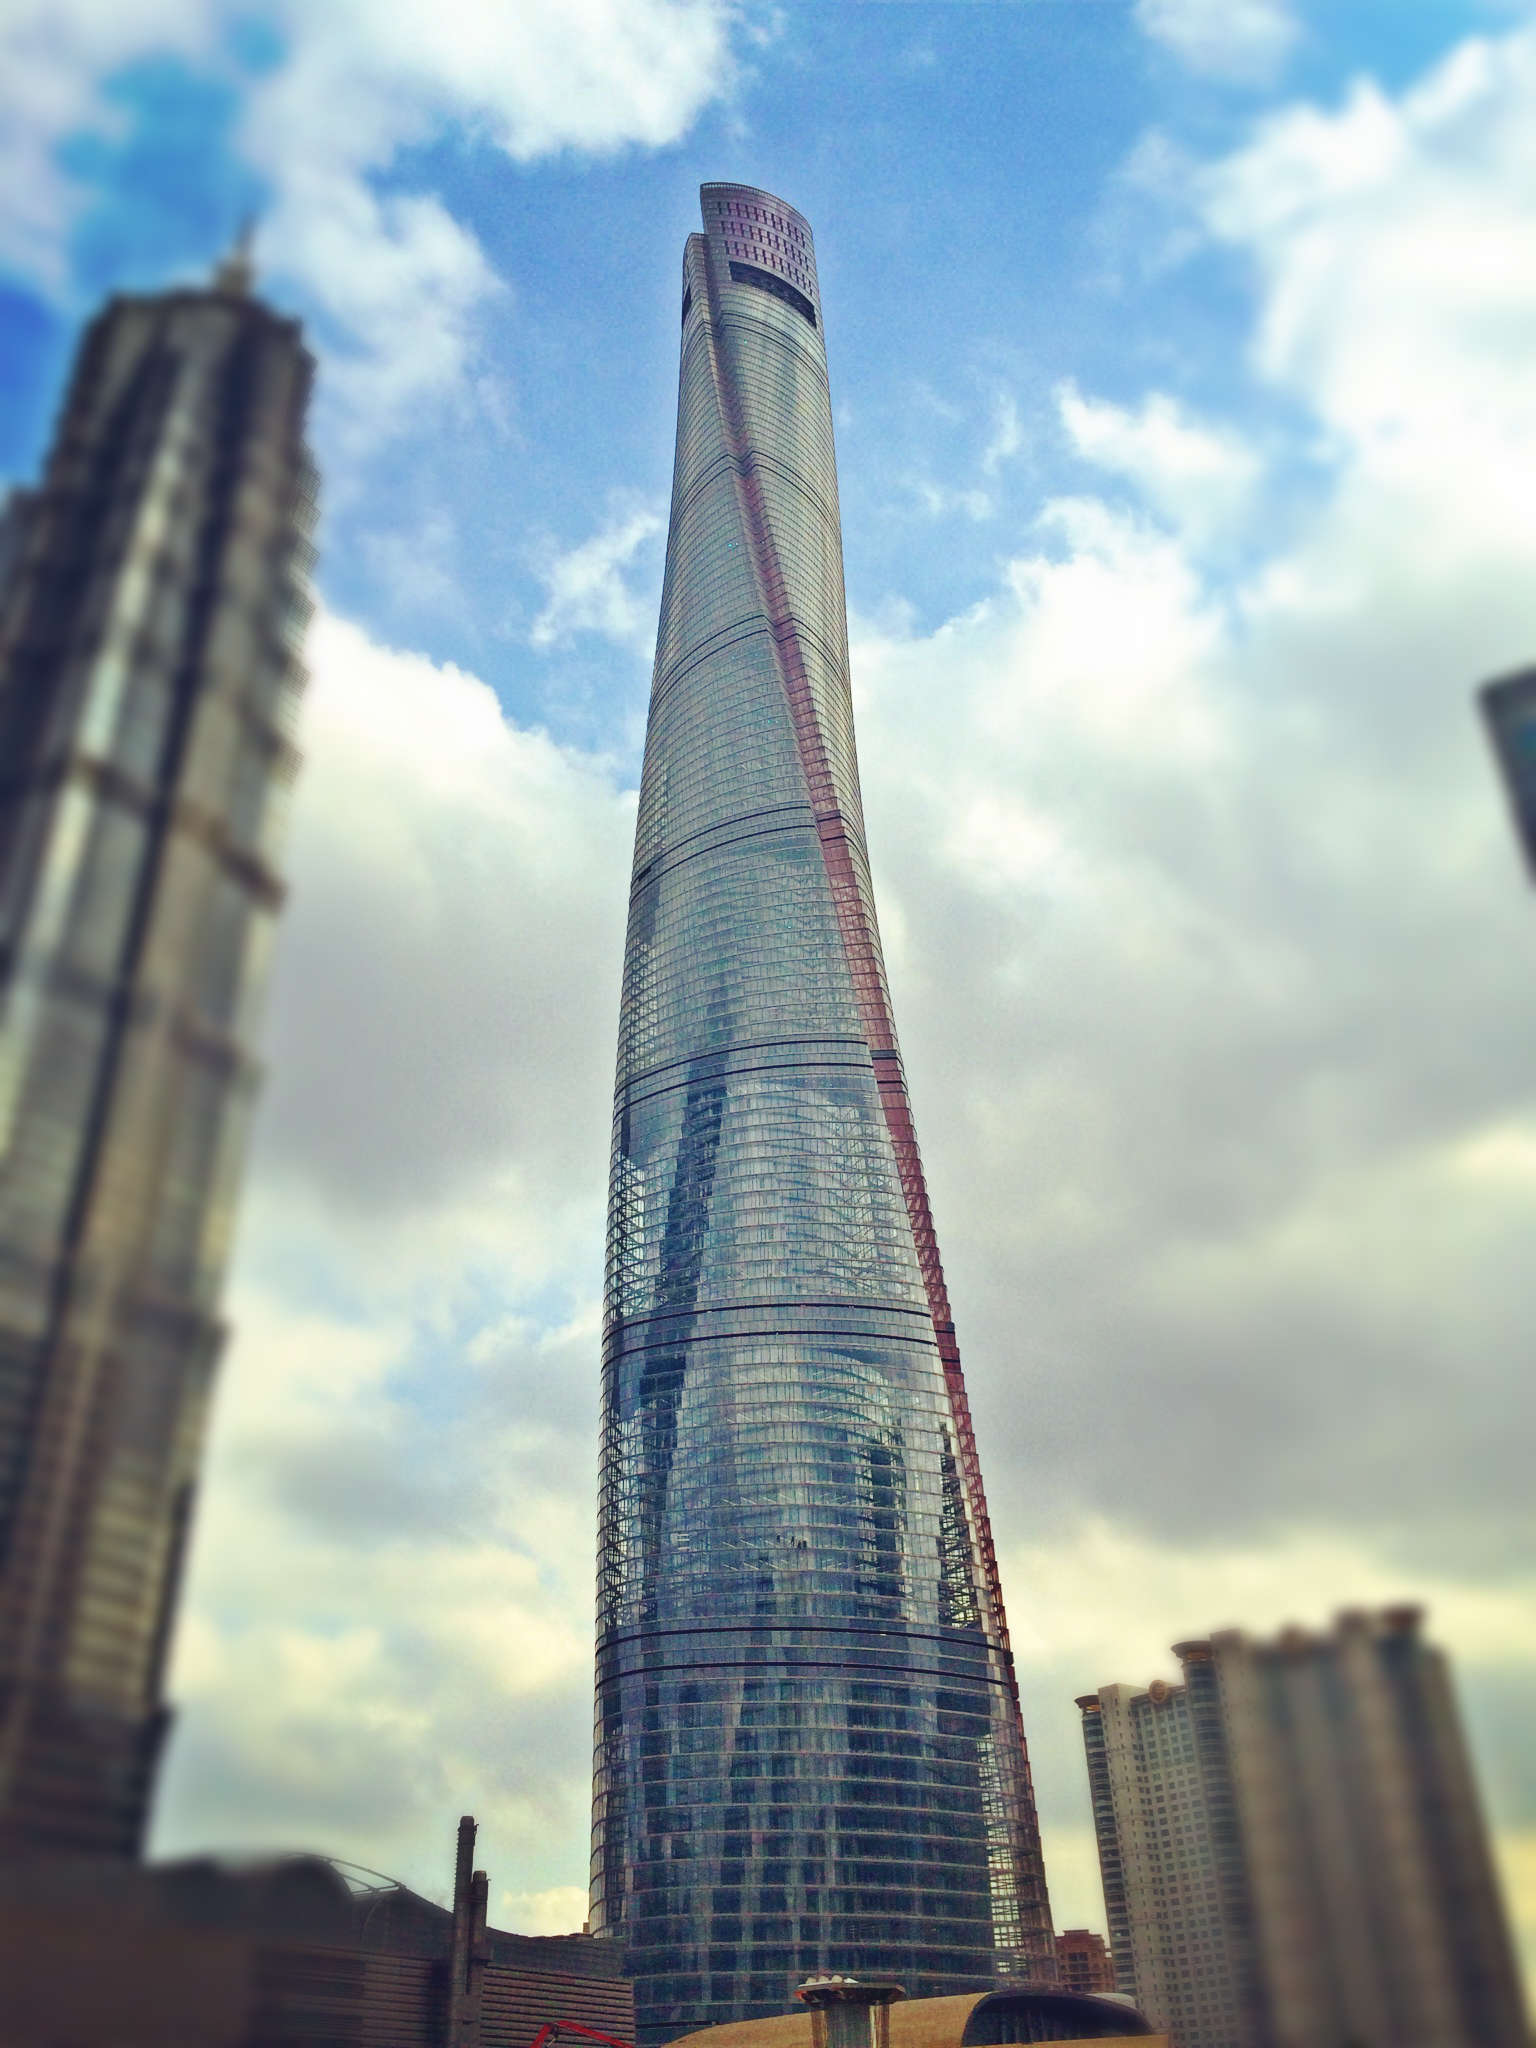 Shanghai Tower, Shanghai, China. At 630 metres, this tower is currently